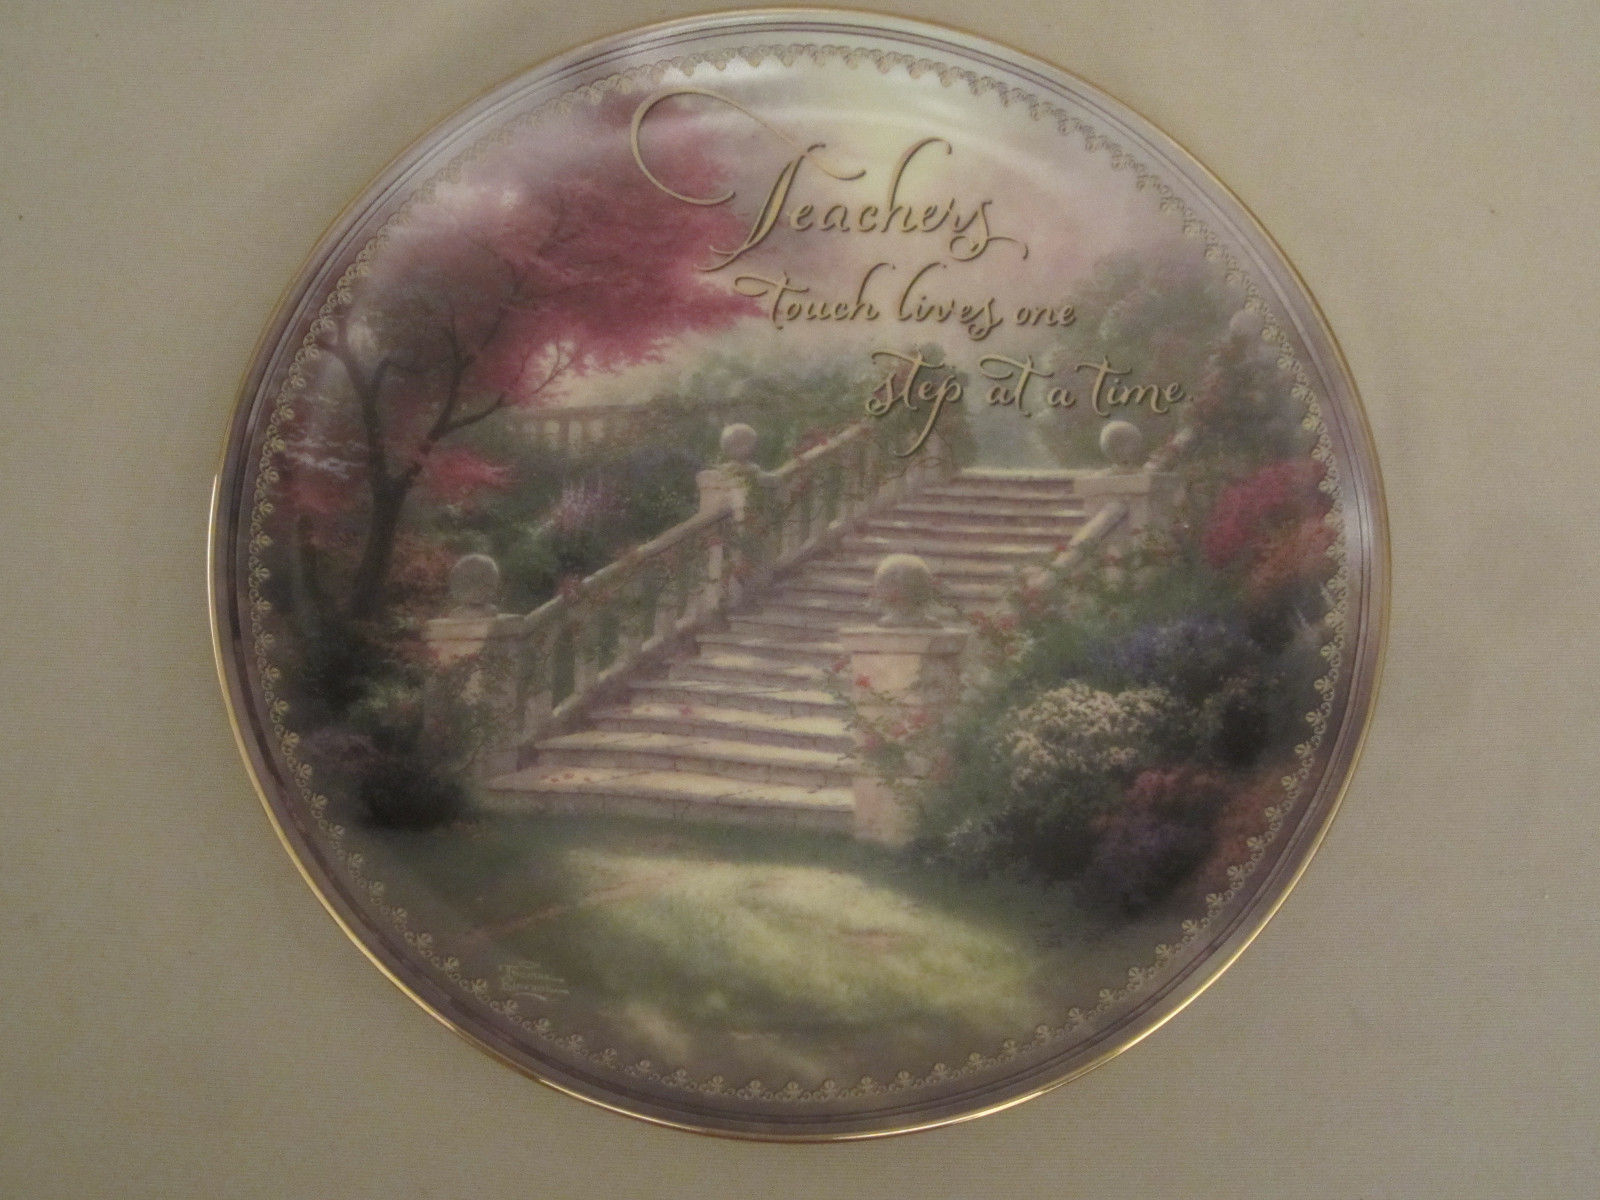 Primary image for THOMAS KINKADE Collector Plate STAIRWAY TO PARADISE  Teachers touch lives